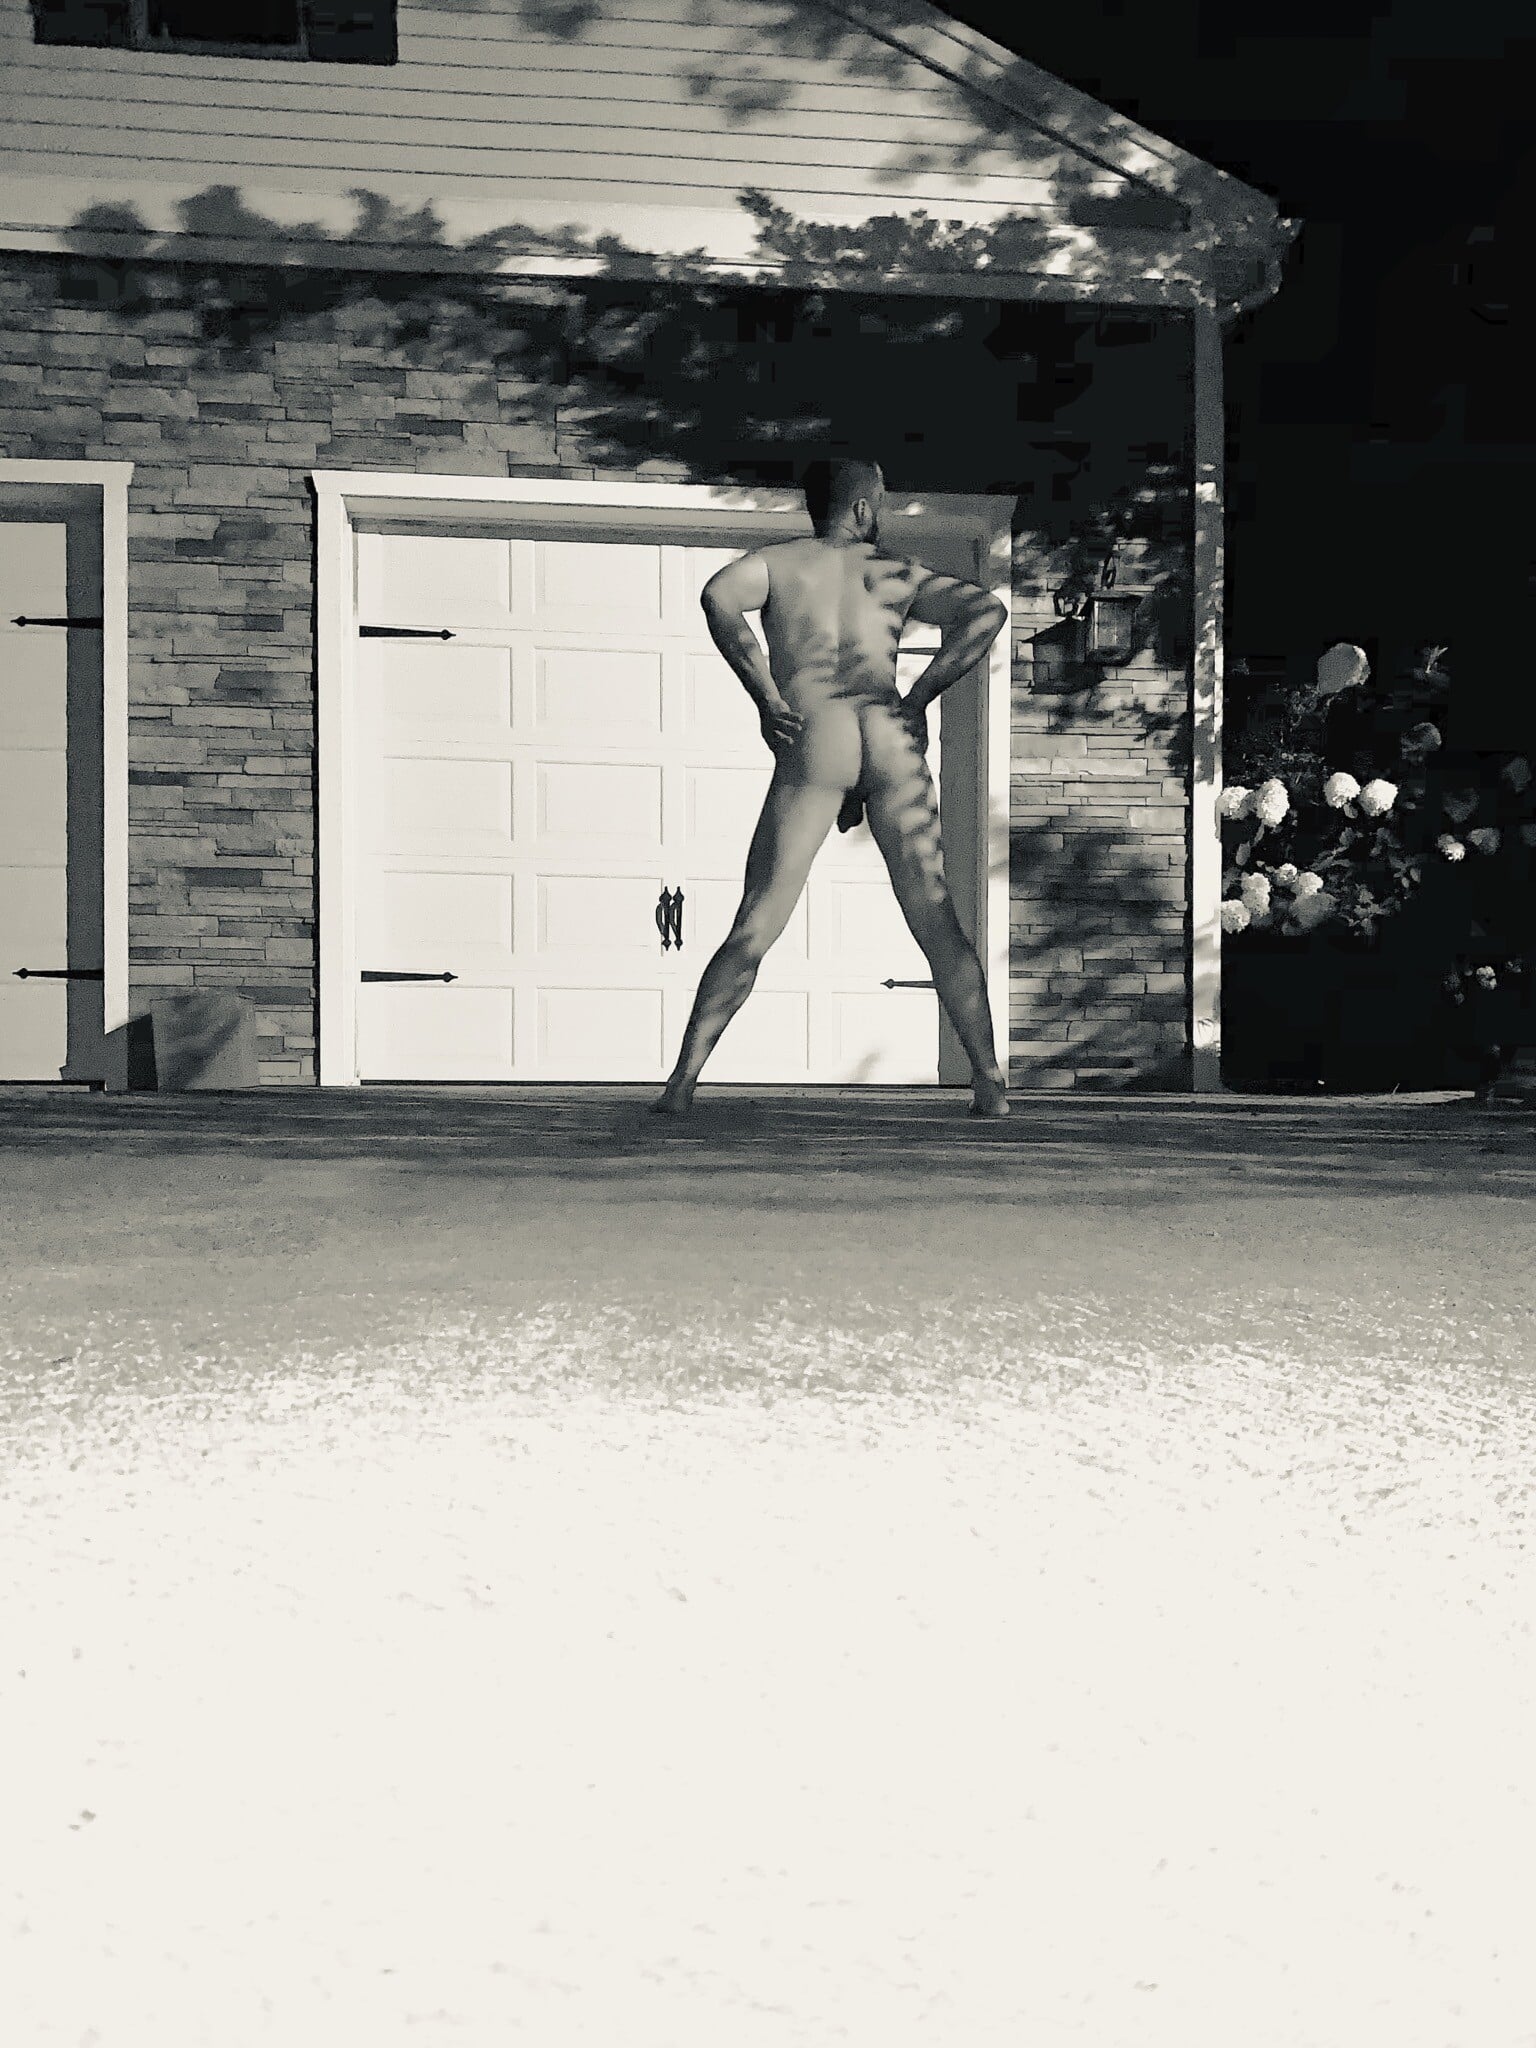 Real Amateurs Public Nudity Pics  : Naked in someone’s driveway Gay man Naked again in frontyard